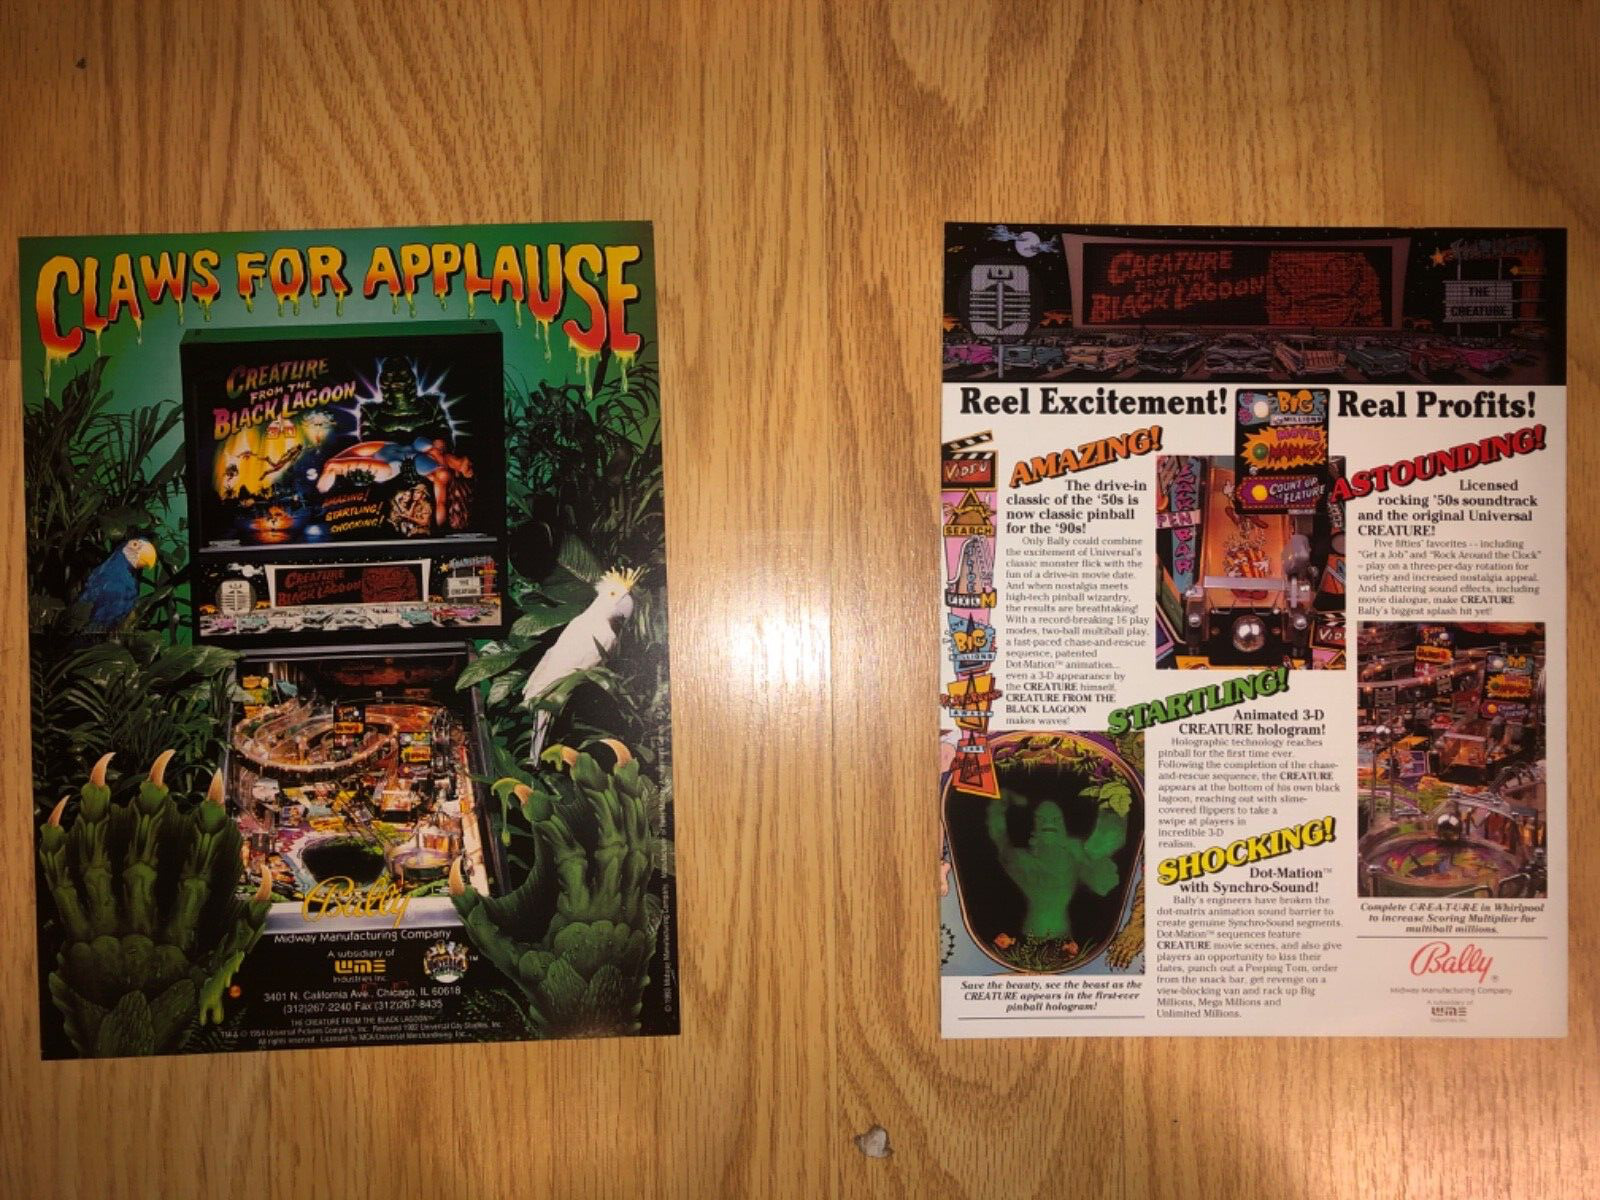 Lot of 2- Bally CREATURE FROM THE BLACK LAGOON - ORIGINAL PINBALL FLYERS 1993